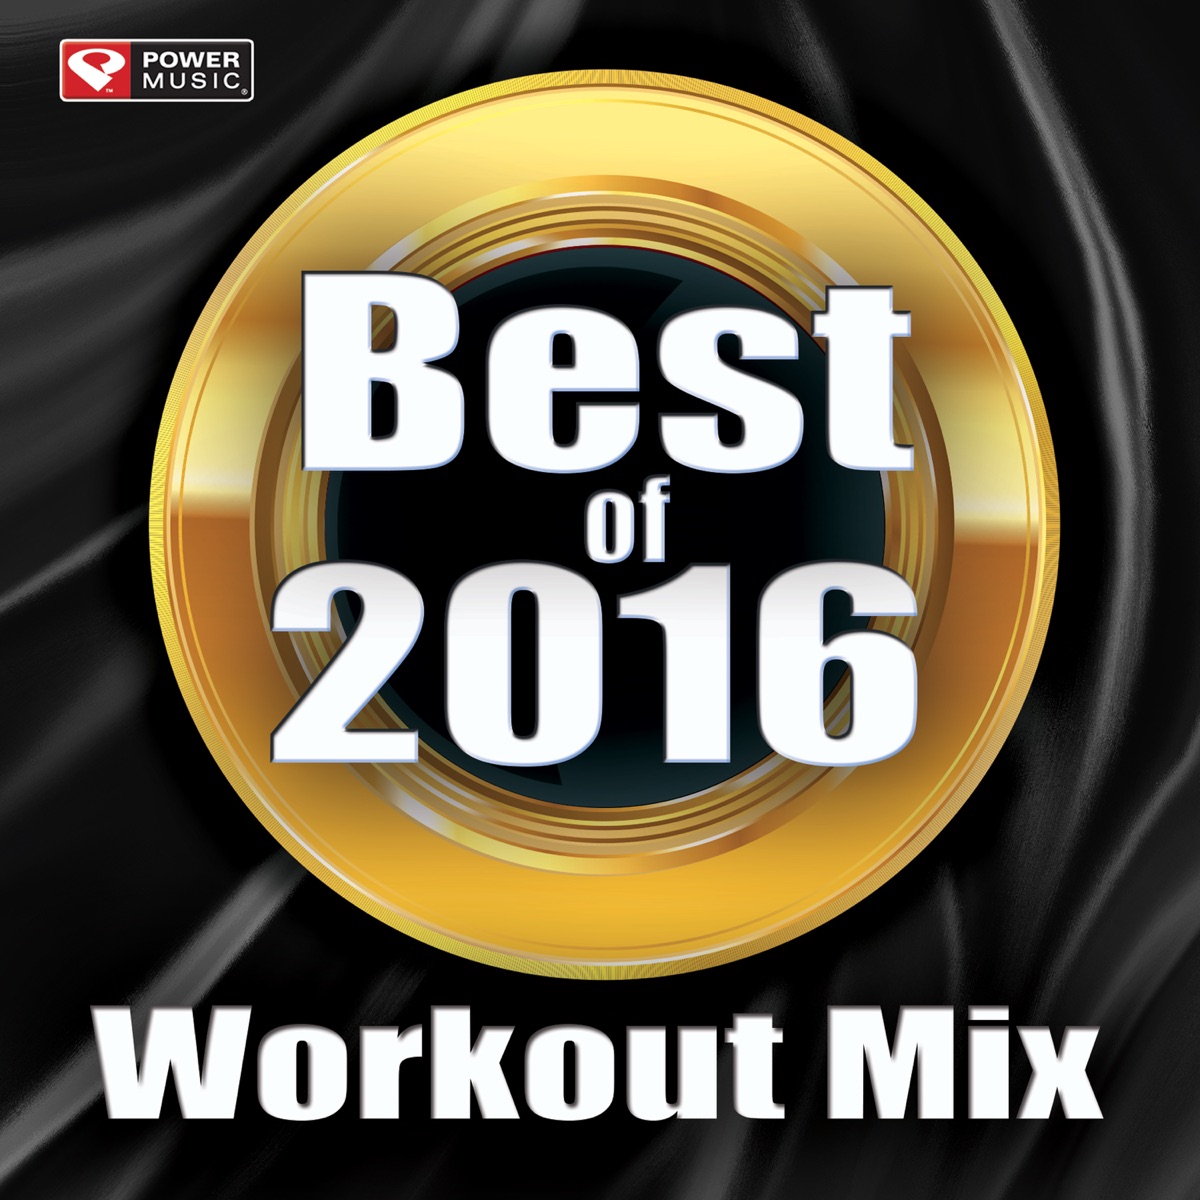 Best of 2022 Workout Mix (Non-Stop Workout Mix 132 BPM) - Album by Power Music  Workout - Apple Music